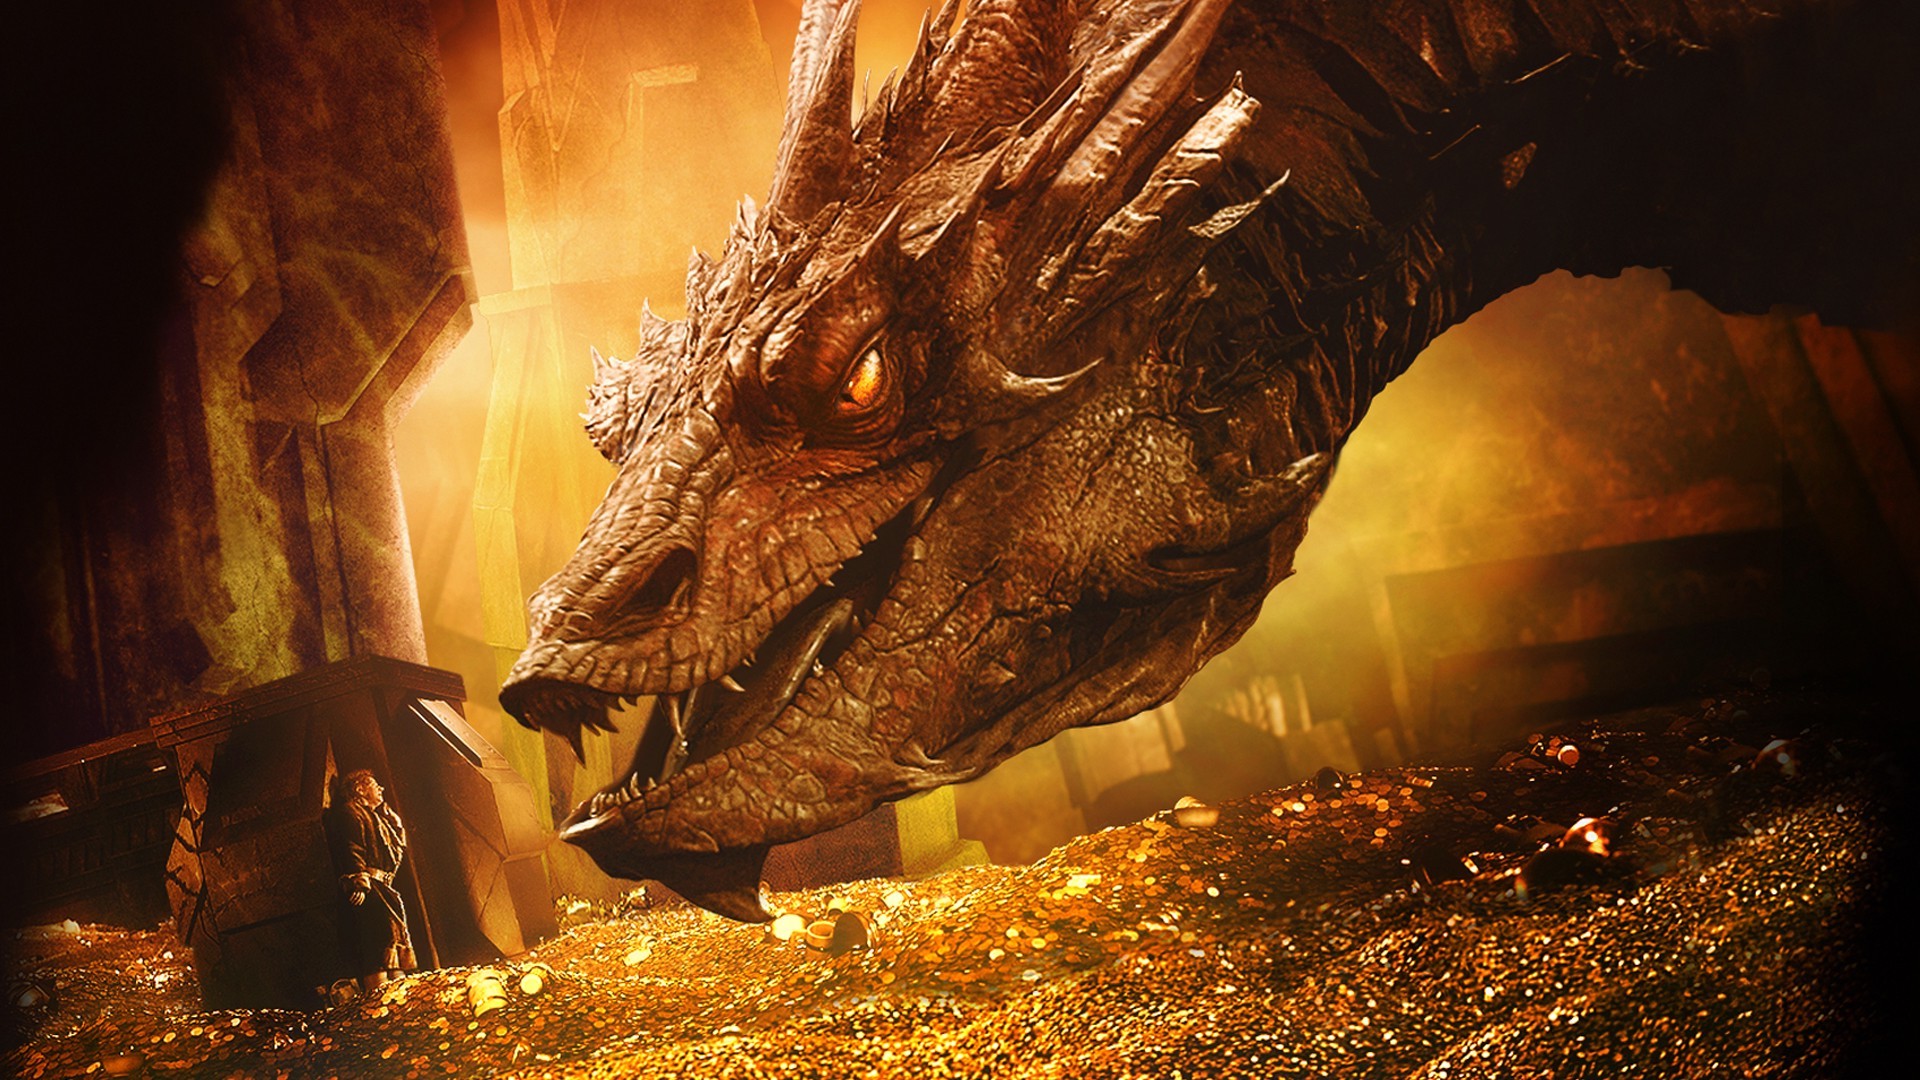 download The Hobbit: The Desolation of Smaug free